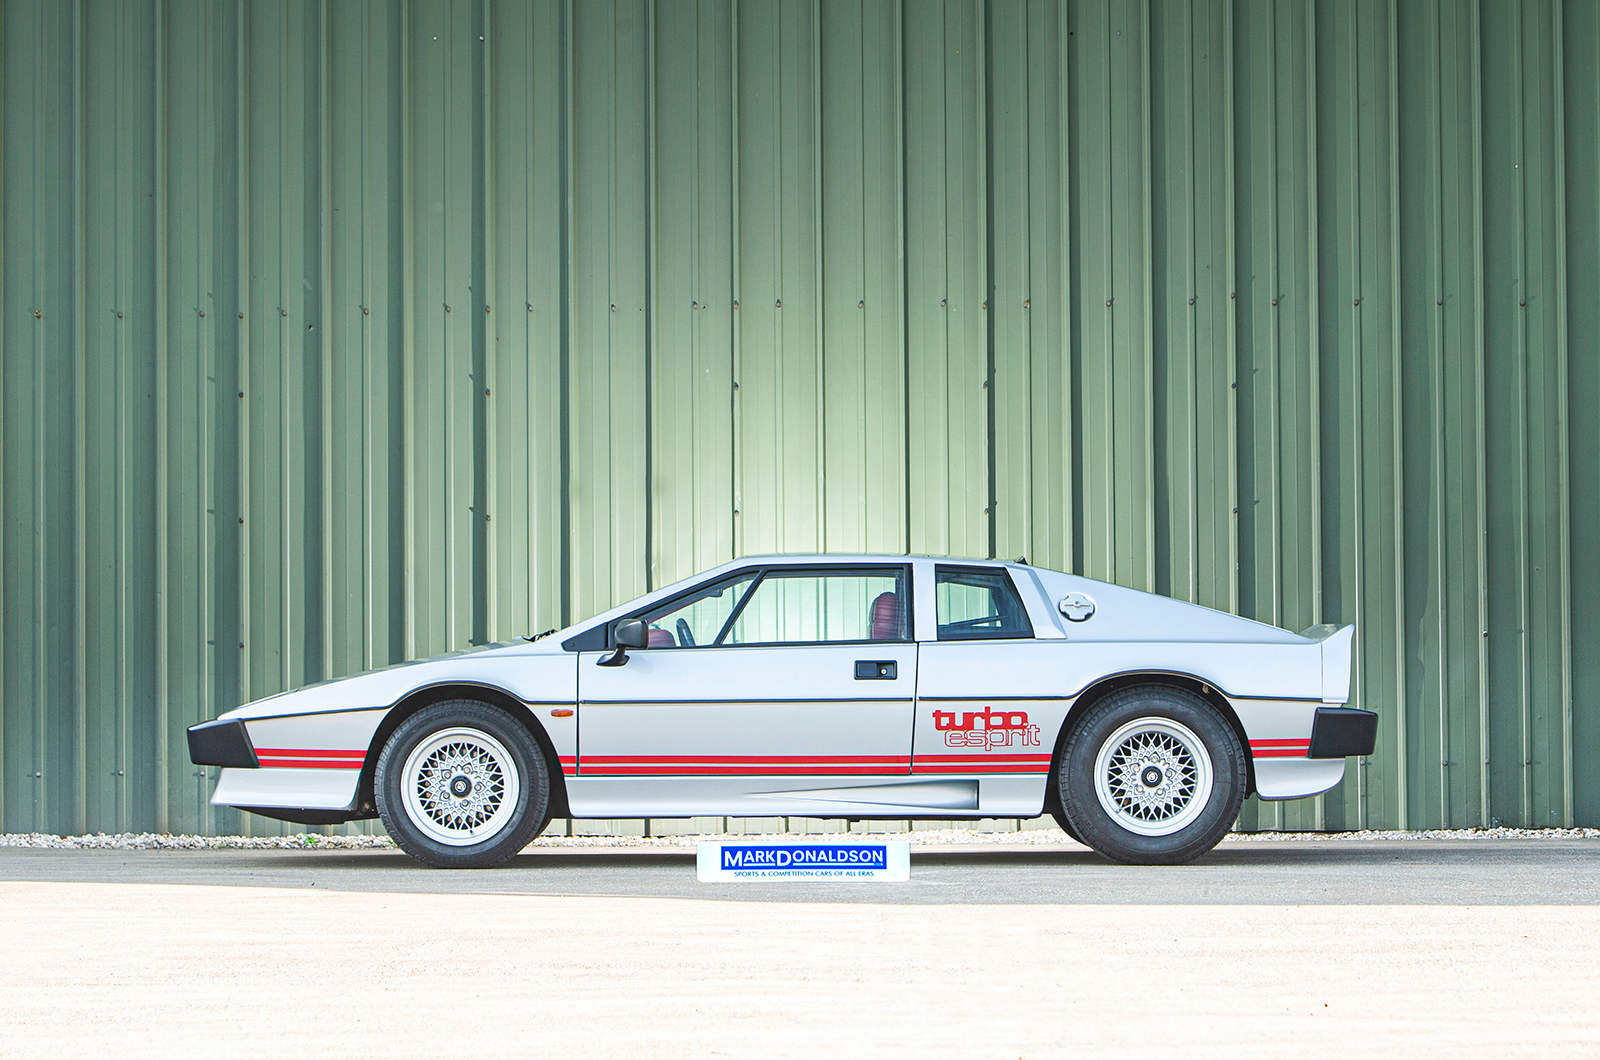 Classic & Sports Car – Want to own Colin Chapman’s Lotus Esprit?